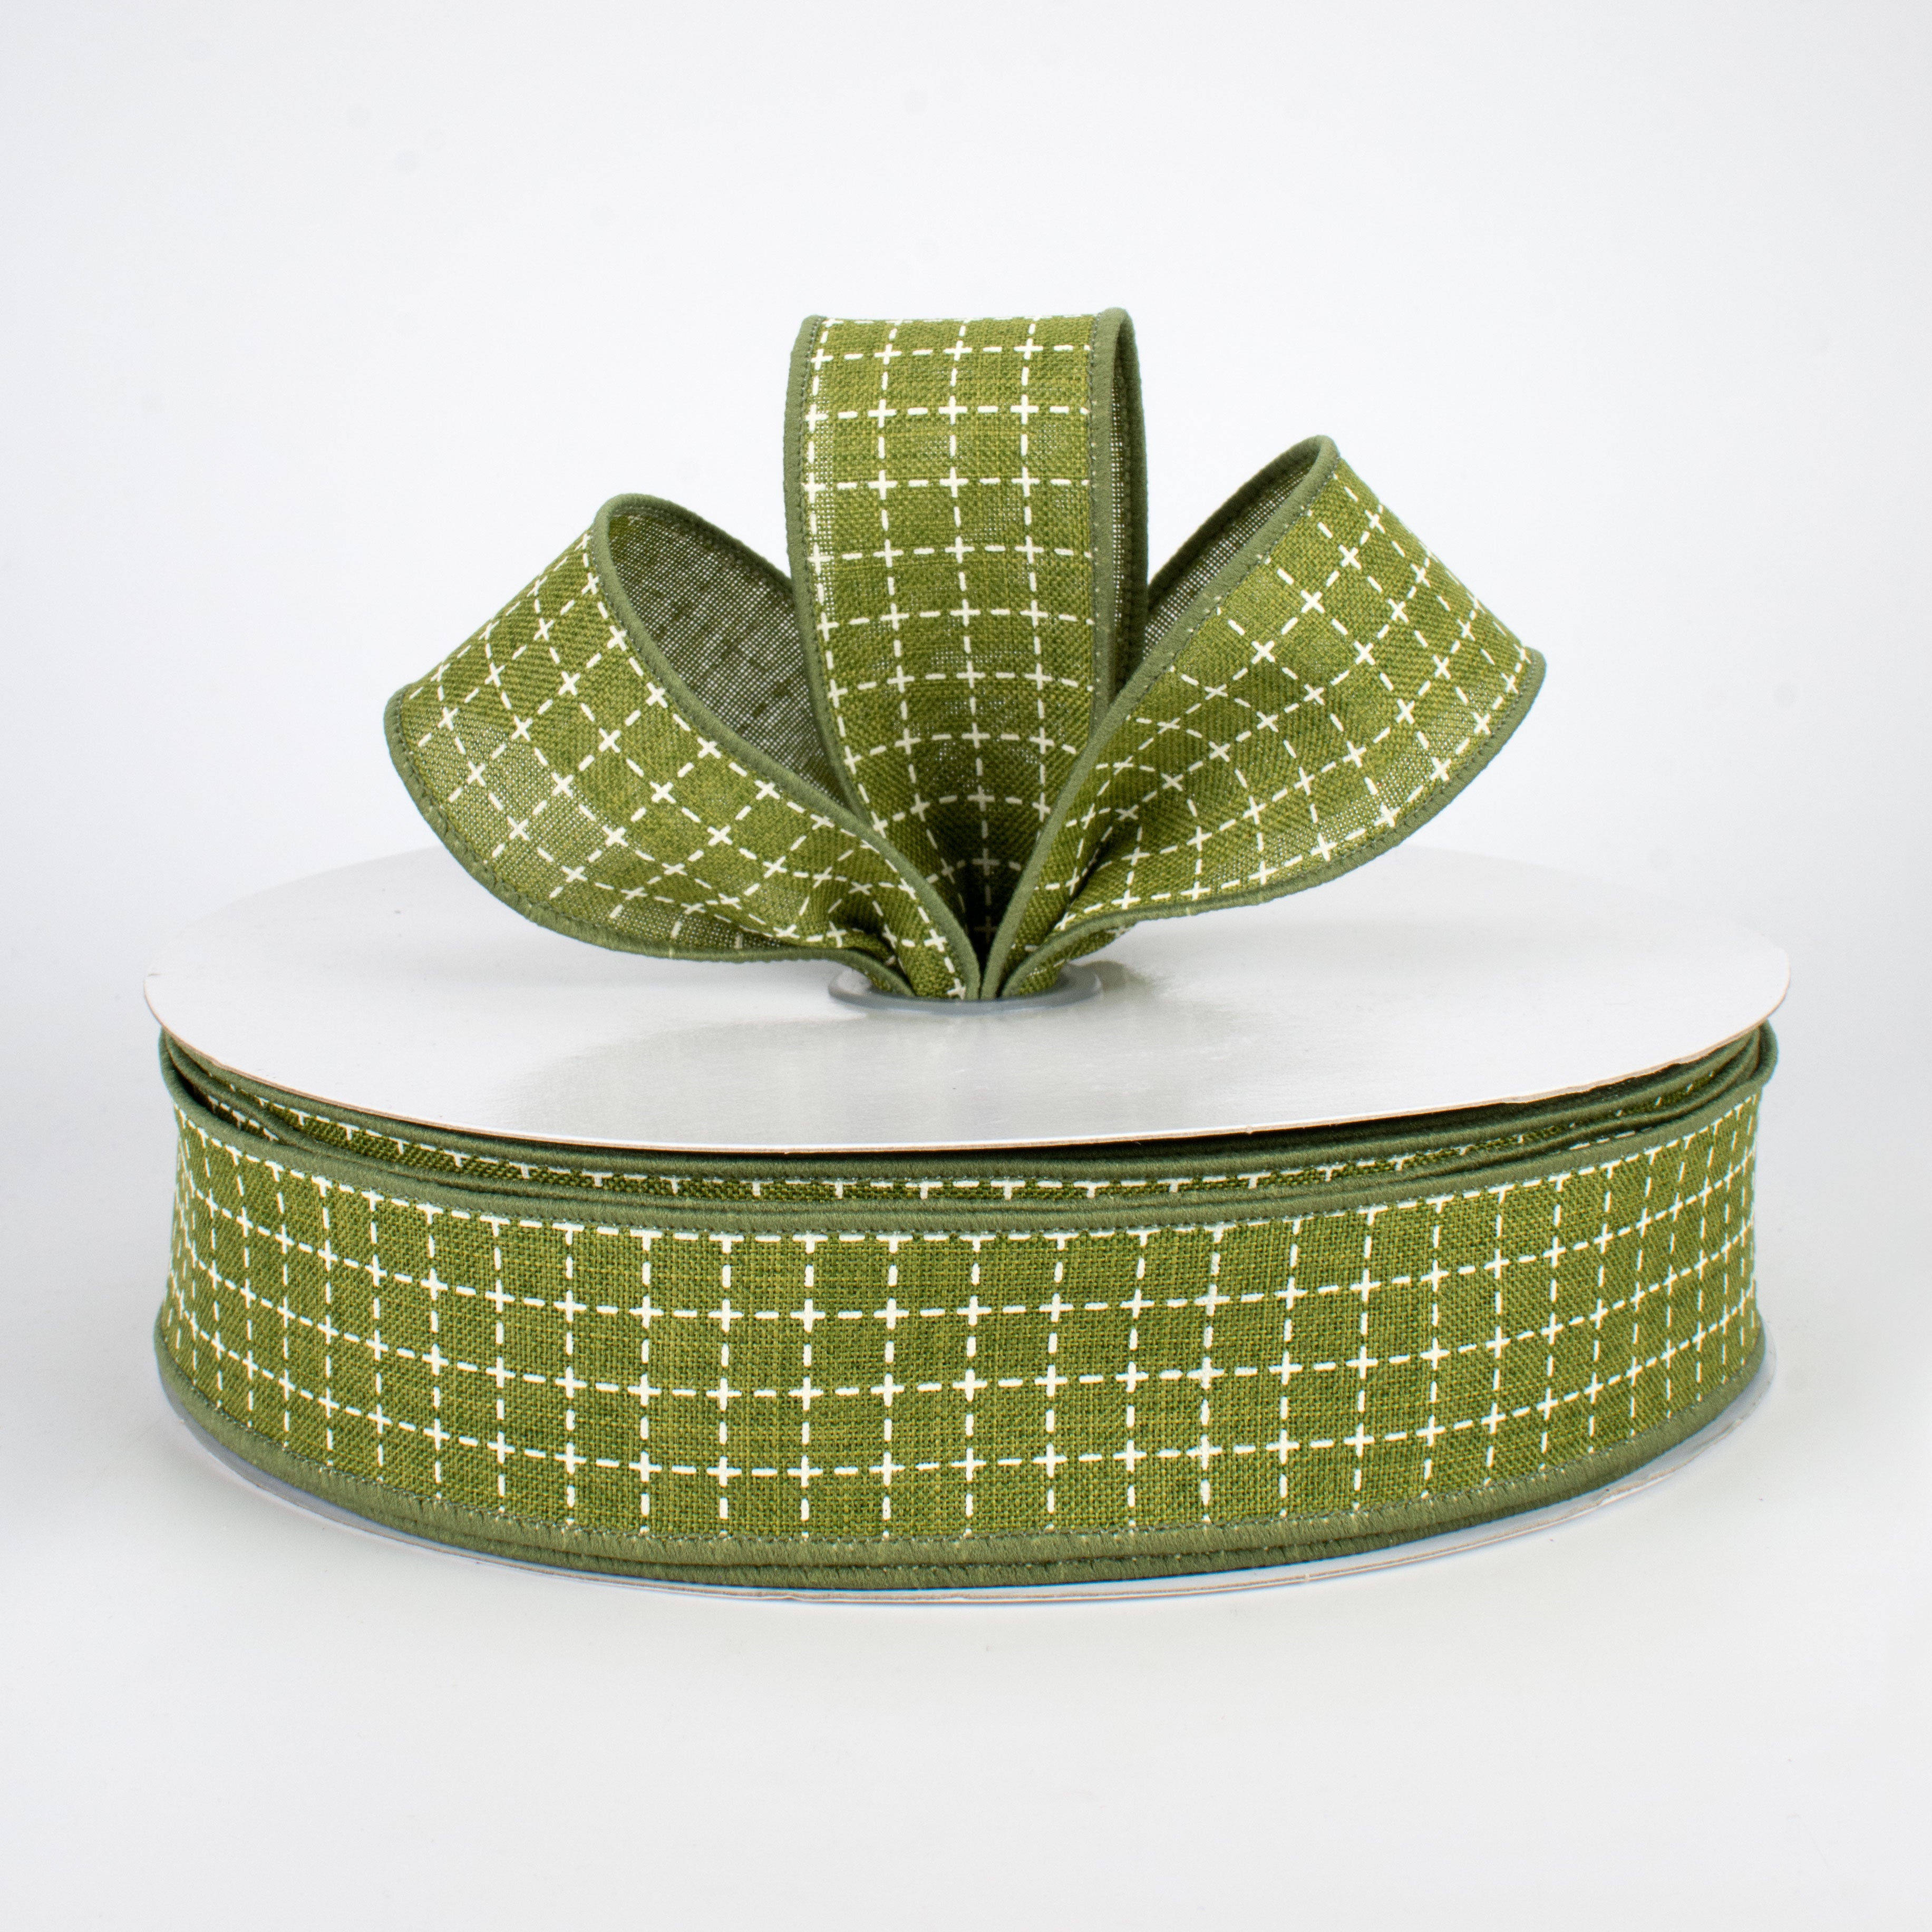 1.5" Stitched Squares Ribbon: Moss Green & Cream (50 Yards)